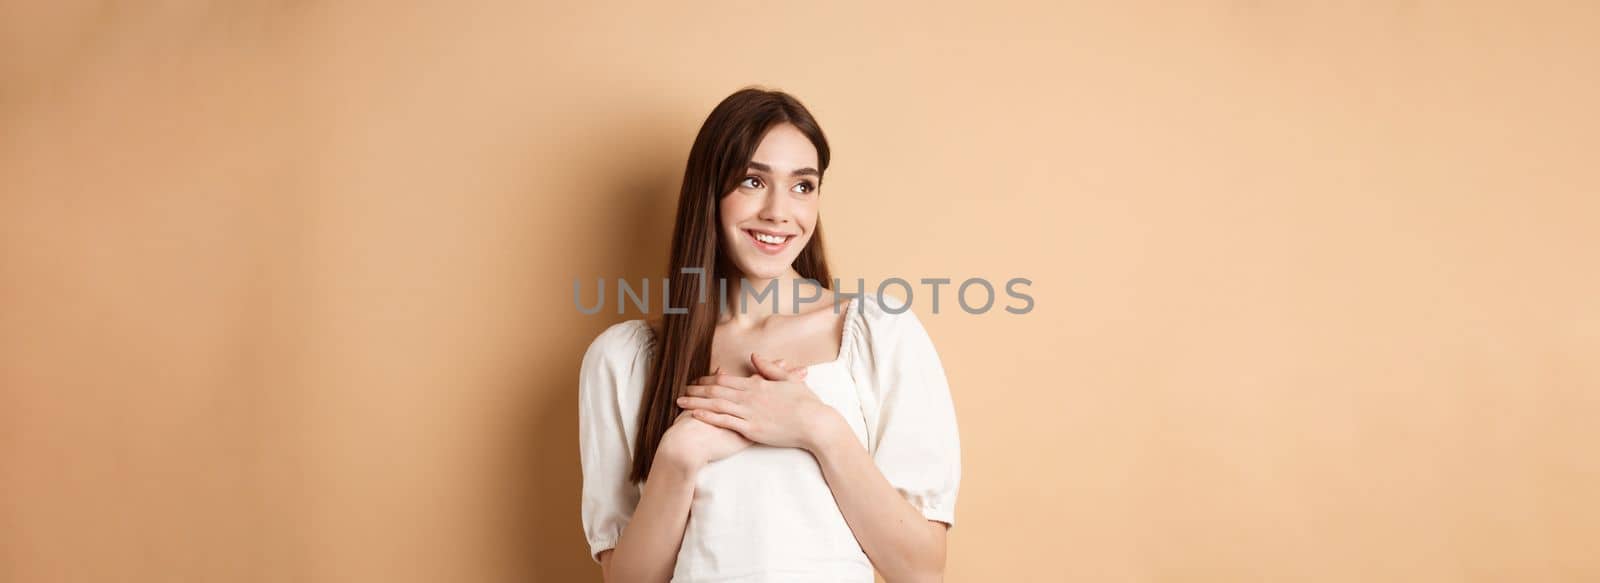 Romantic young girl in dress holding hands on heart, smiling and looking at empty space thankful, feeling gratitude, standing on beige background.